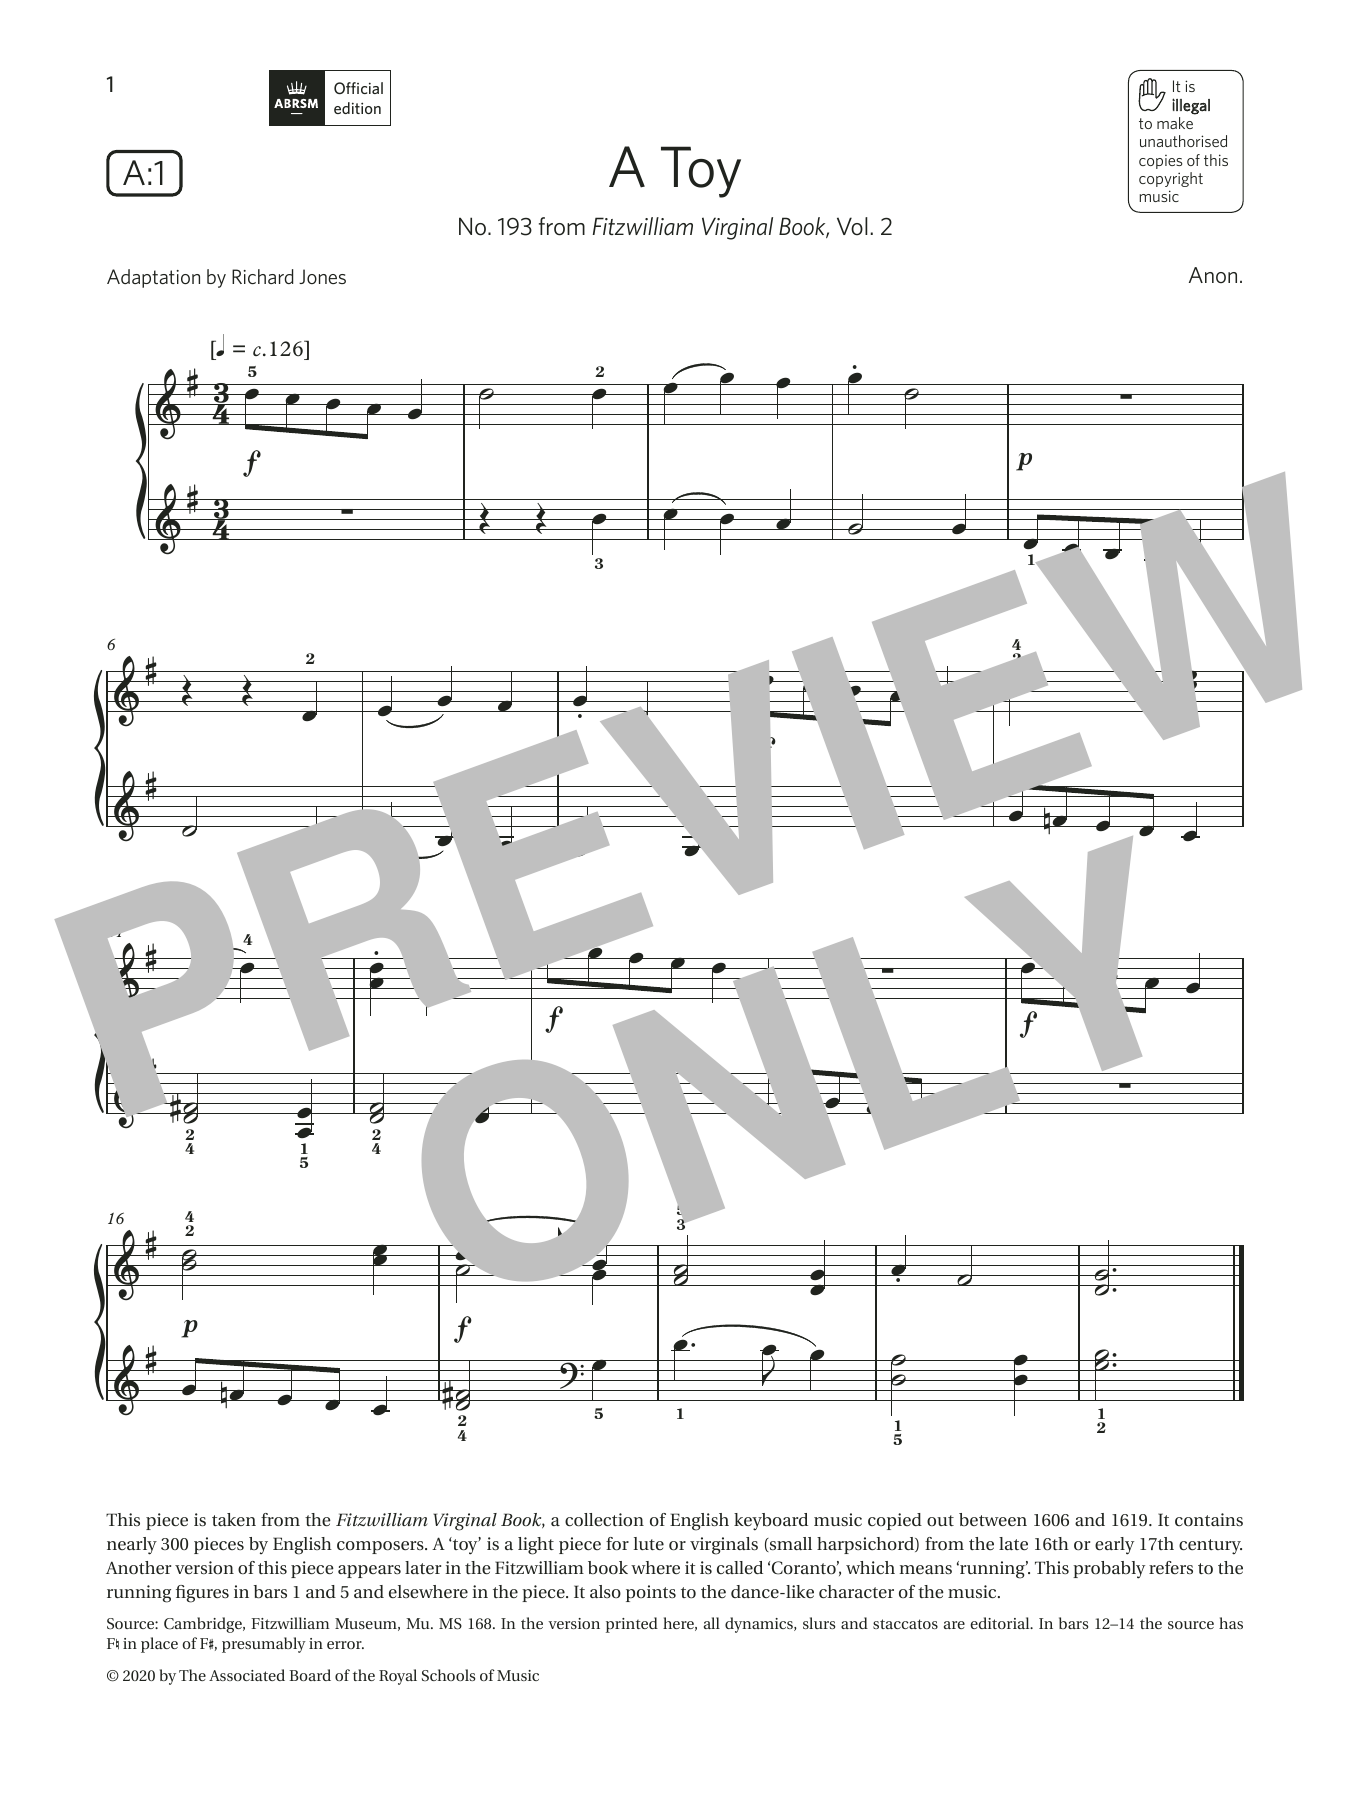 Download Anon. A Toy (Grade 1, list A1, from the ABRSM Sheet Music